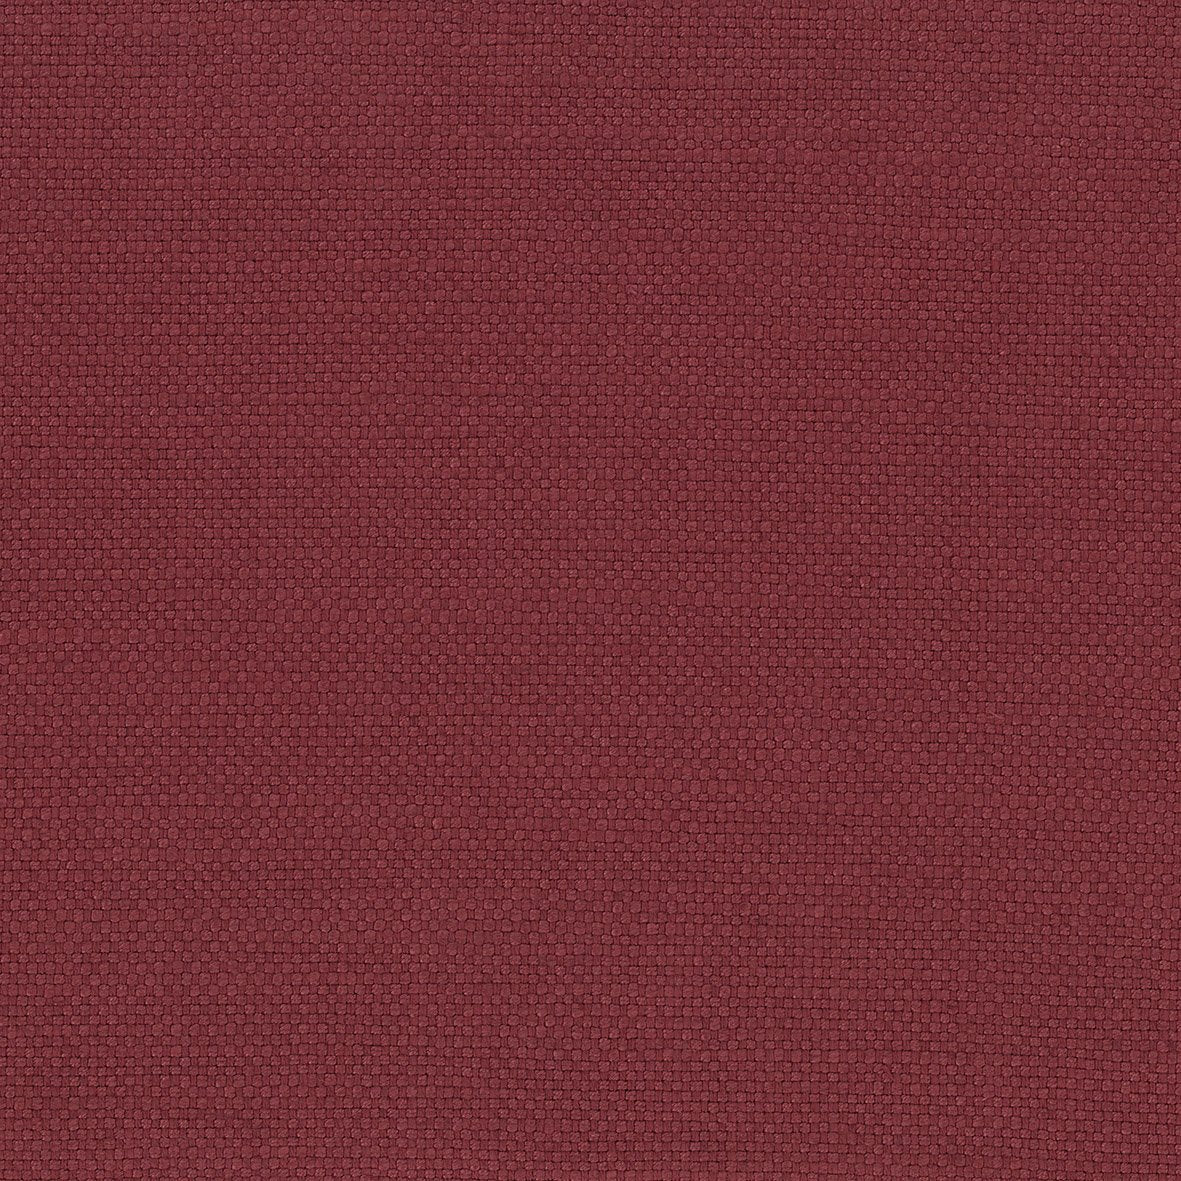 Nina Campbell Fabric - Poquelin Colette Red NCF4312-01